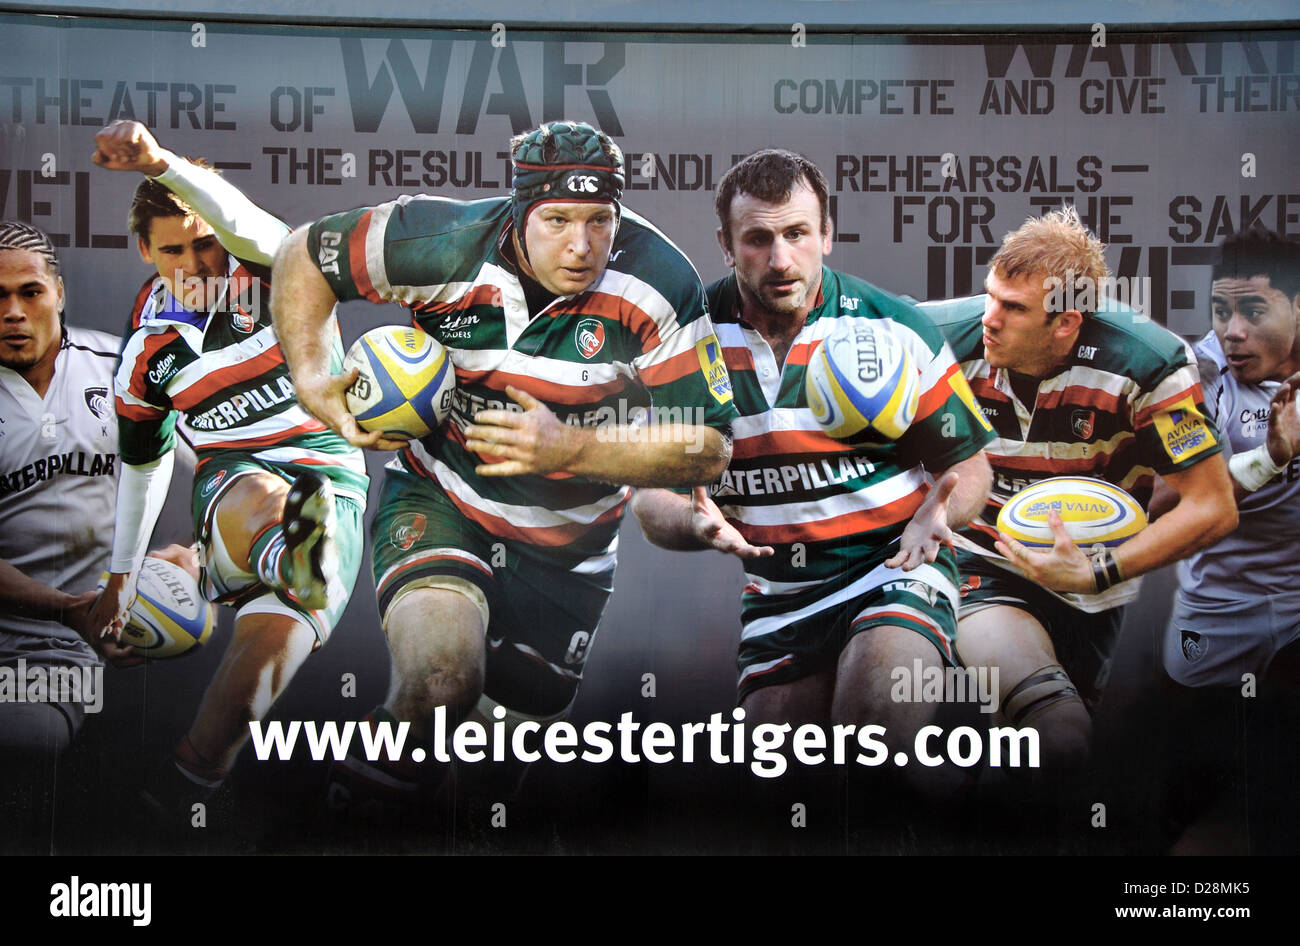 Poster, Leicester Tigers Rugby Club, Welford Road, Leicester, England, UK Banque D'Images